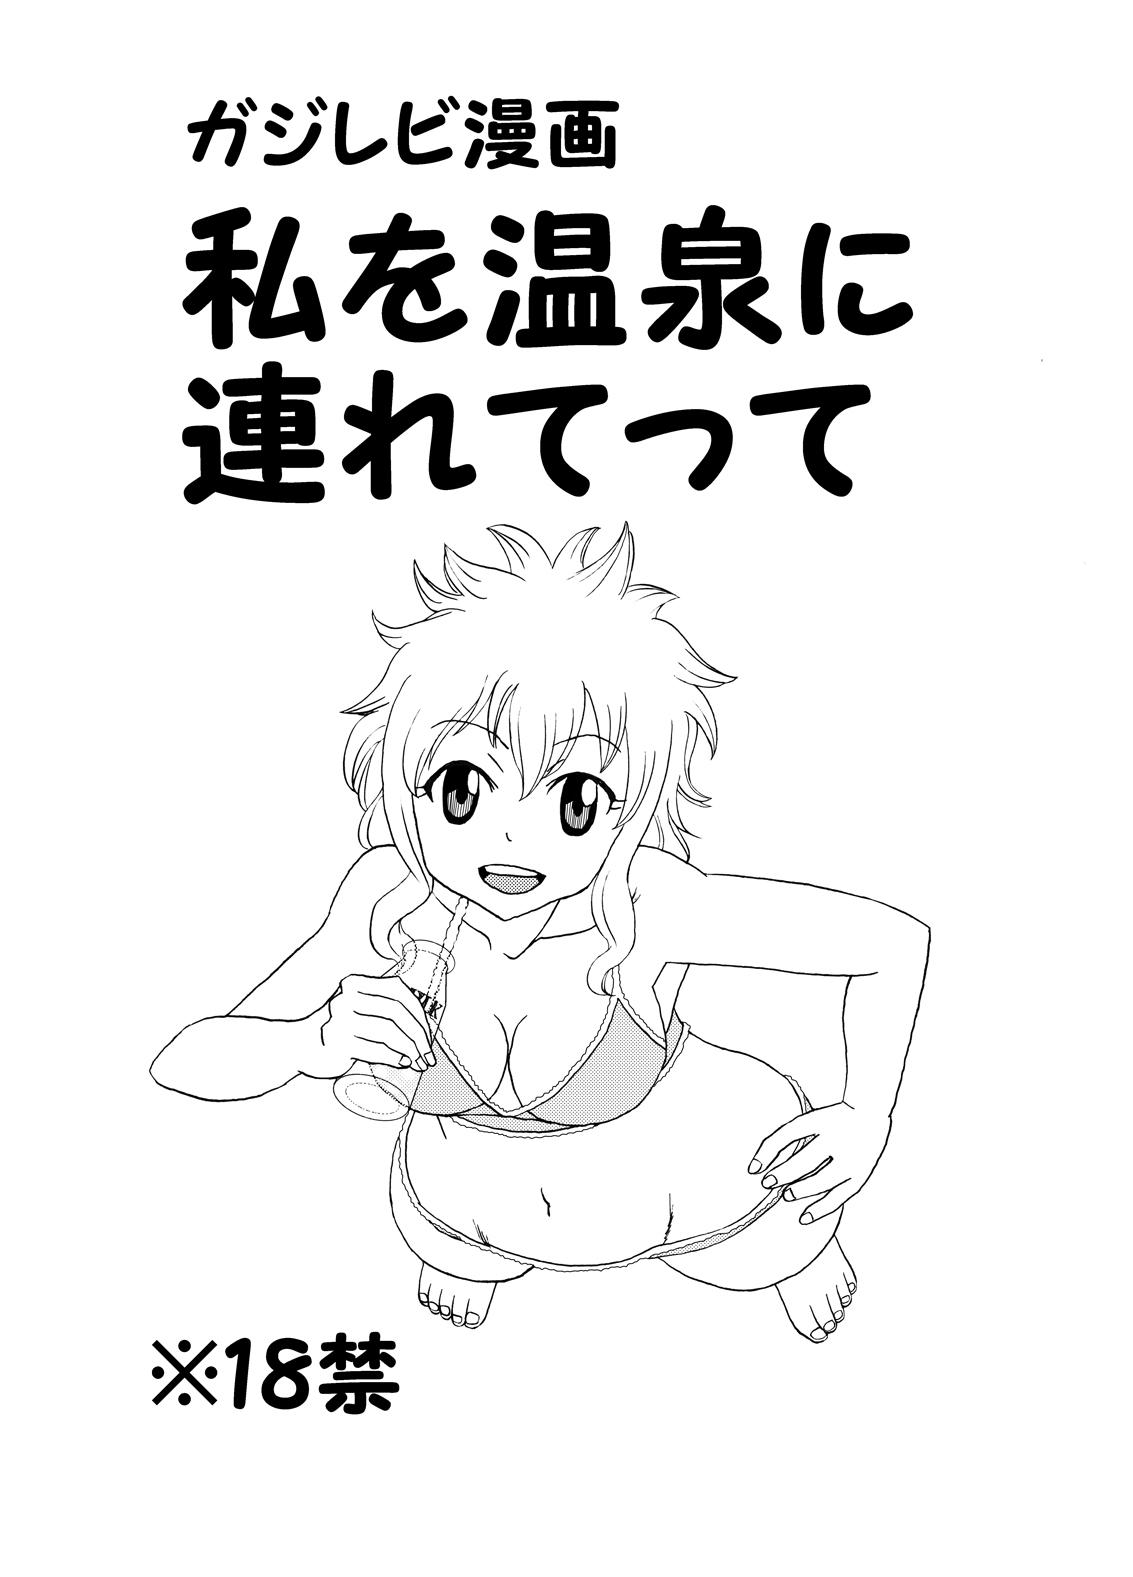 Wife ガジレビ漫画・私を温泉に連れてって - Fairy tail Group - Picture 1